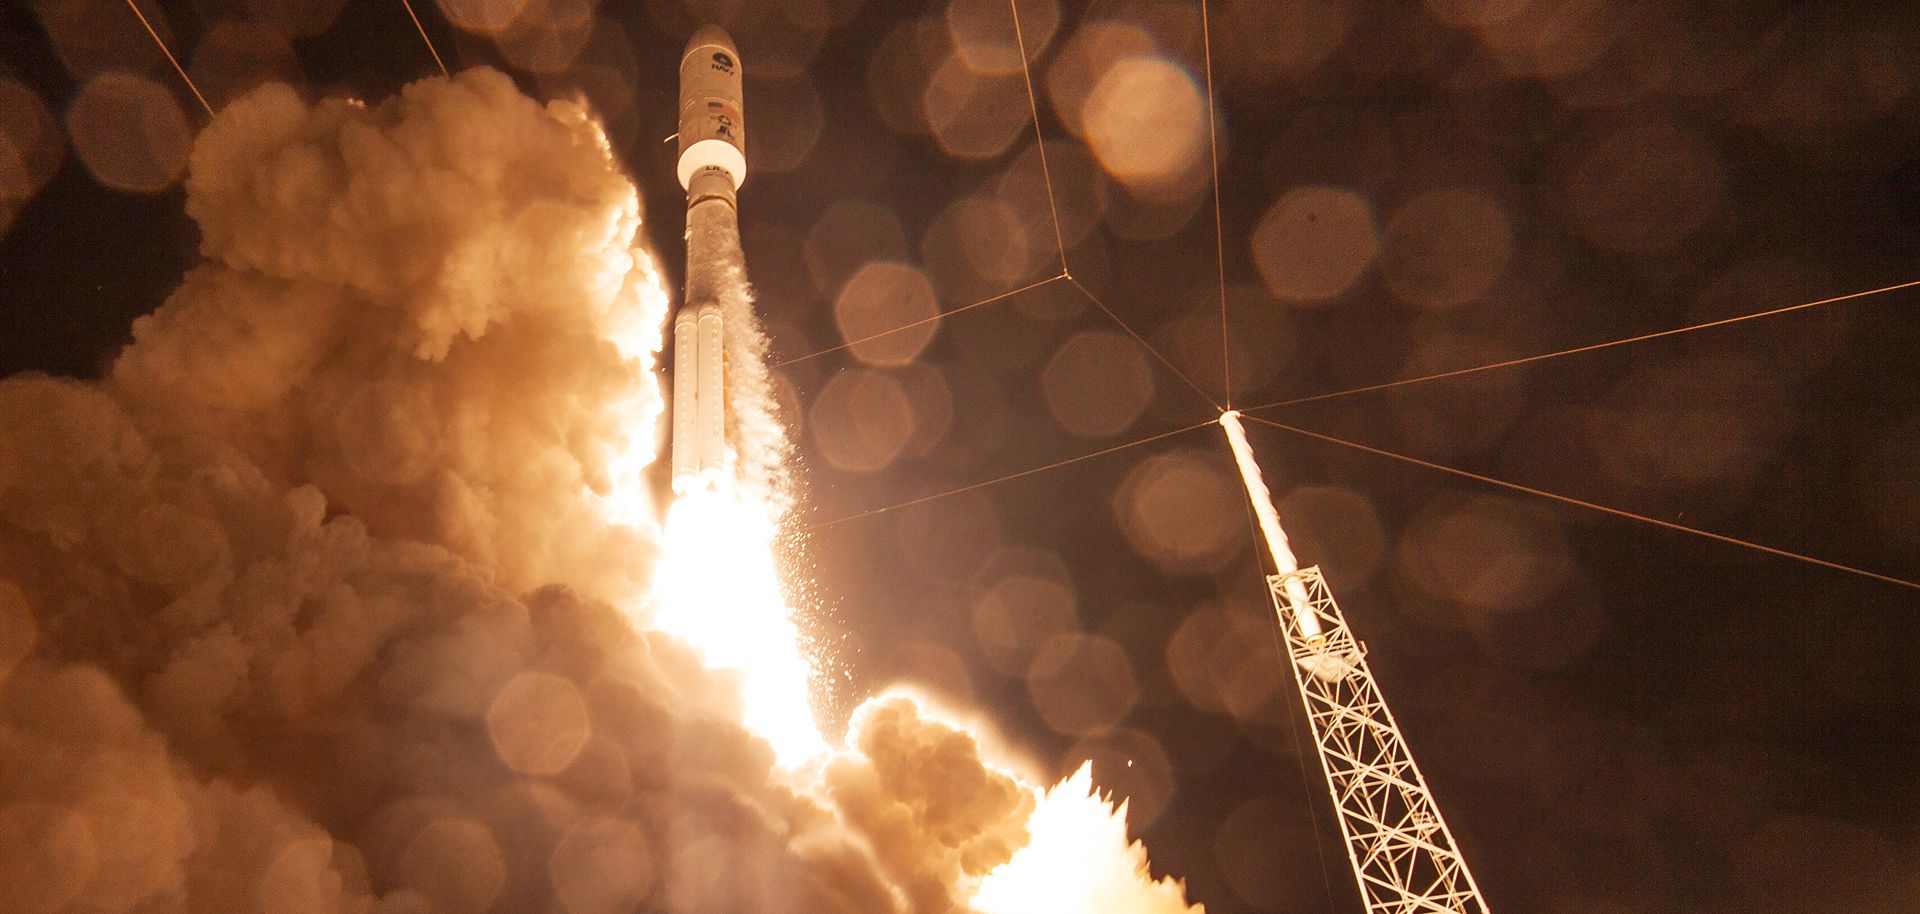 The race to put missiles in space